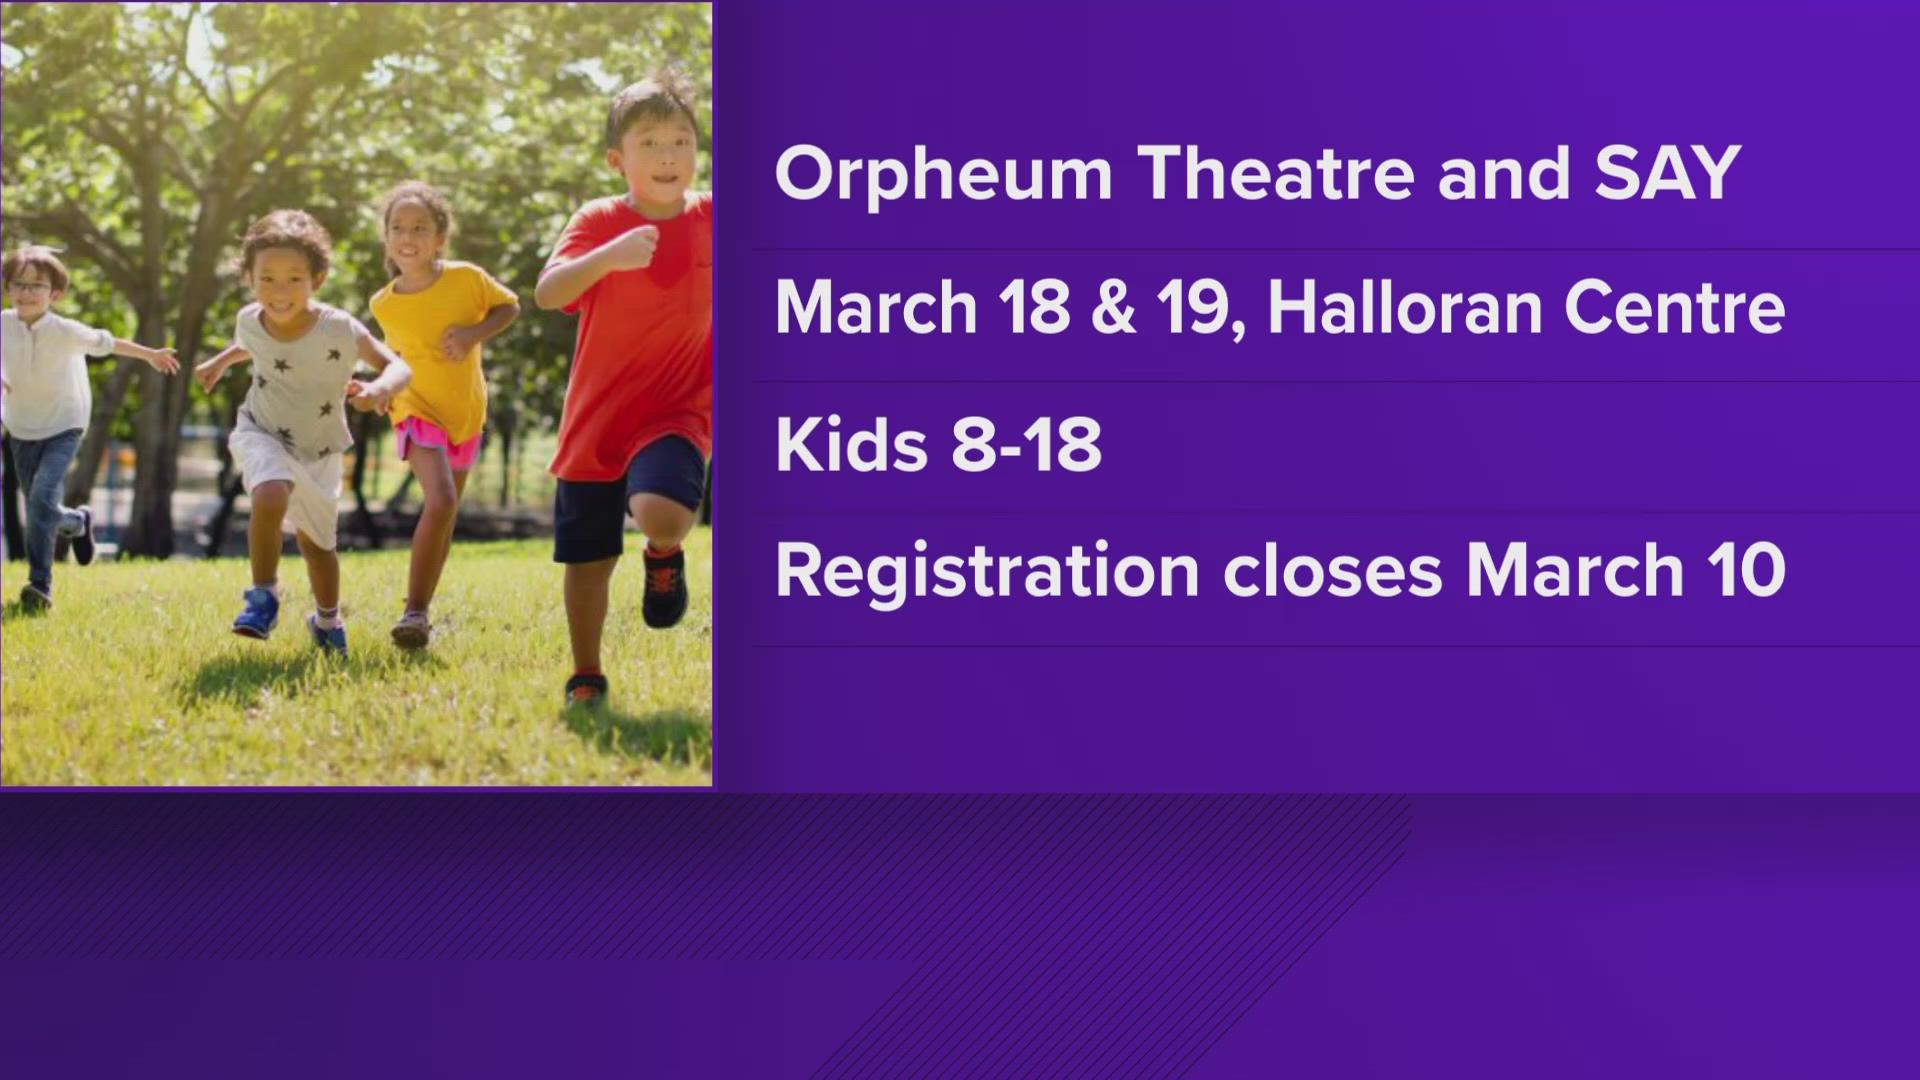 The Orpheum Theatre Group announce the free two-day camp will take place March 18 - 19, 2023, at the Halloran Centre.